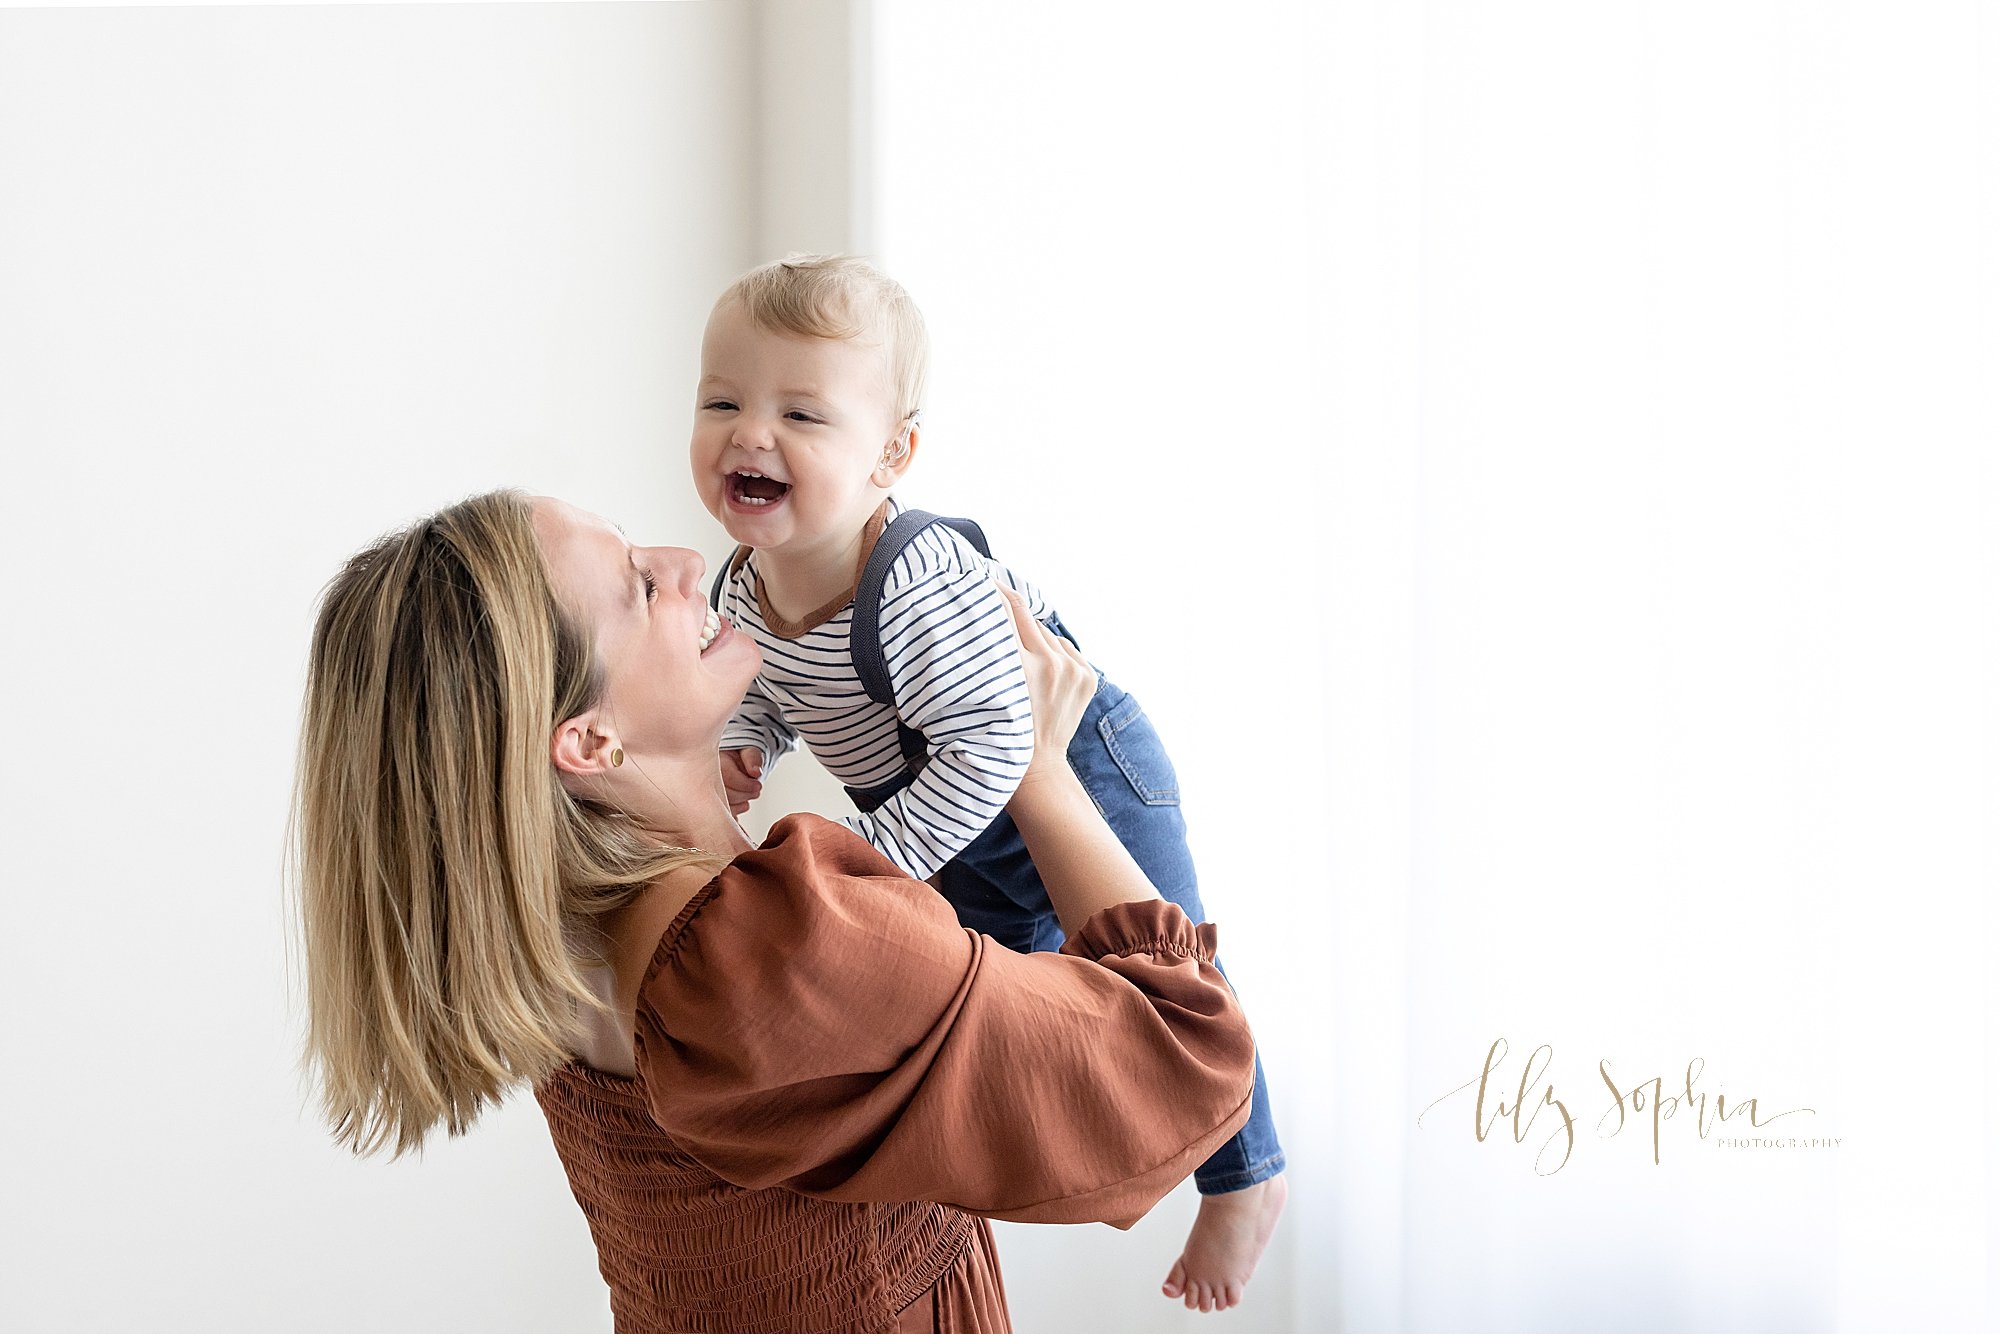  Mother and son share a fun moment as mom lifts her son above her and he giggles during a first birthday family photo session taken in front of a window streaming natural light in a studio near Sandy Springs in Atlanta. 